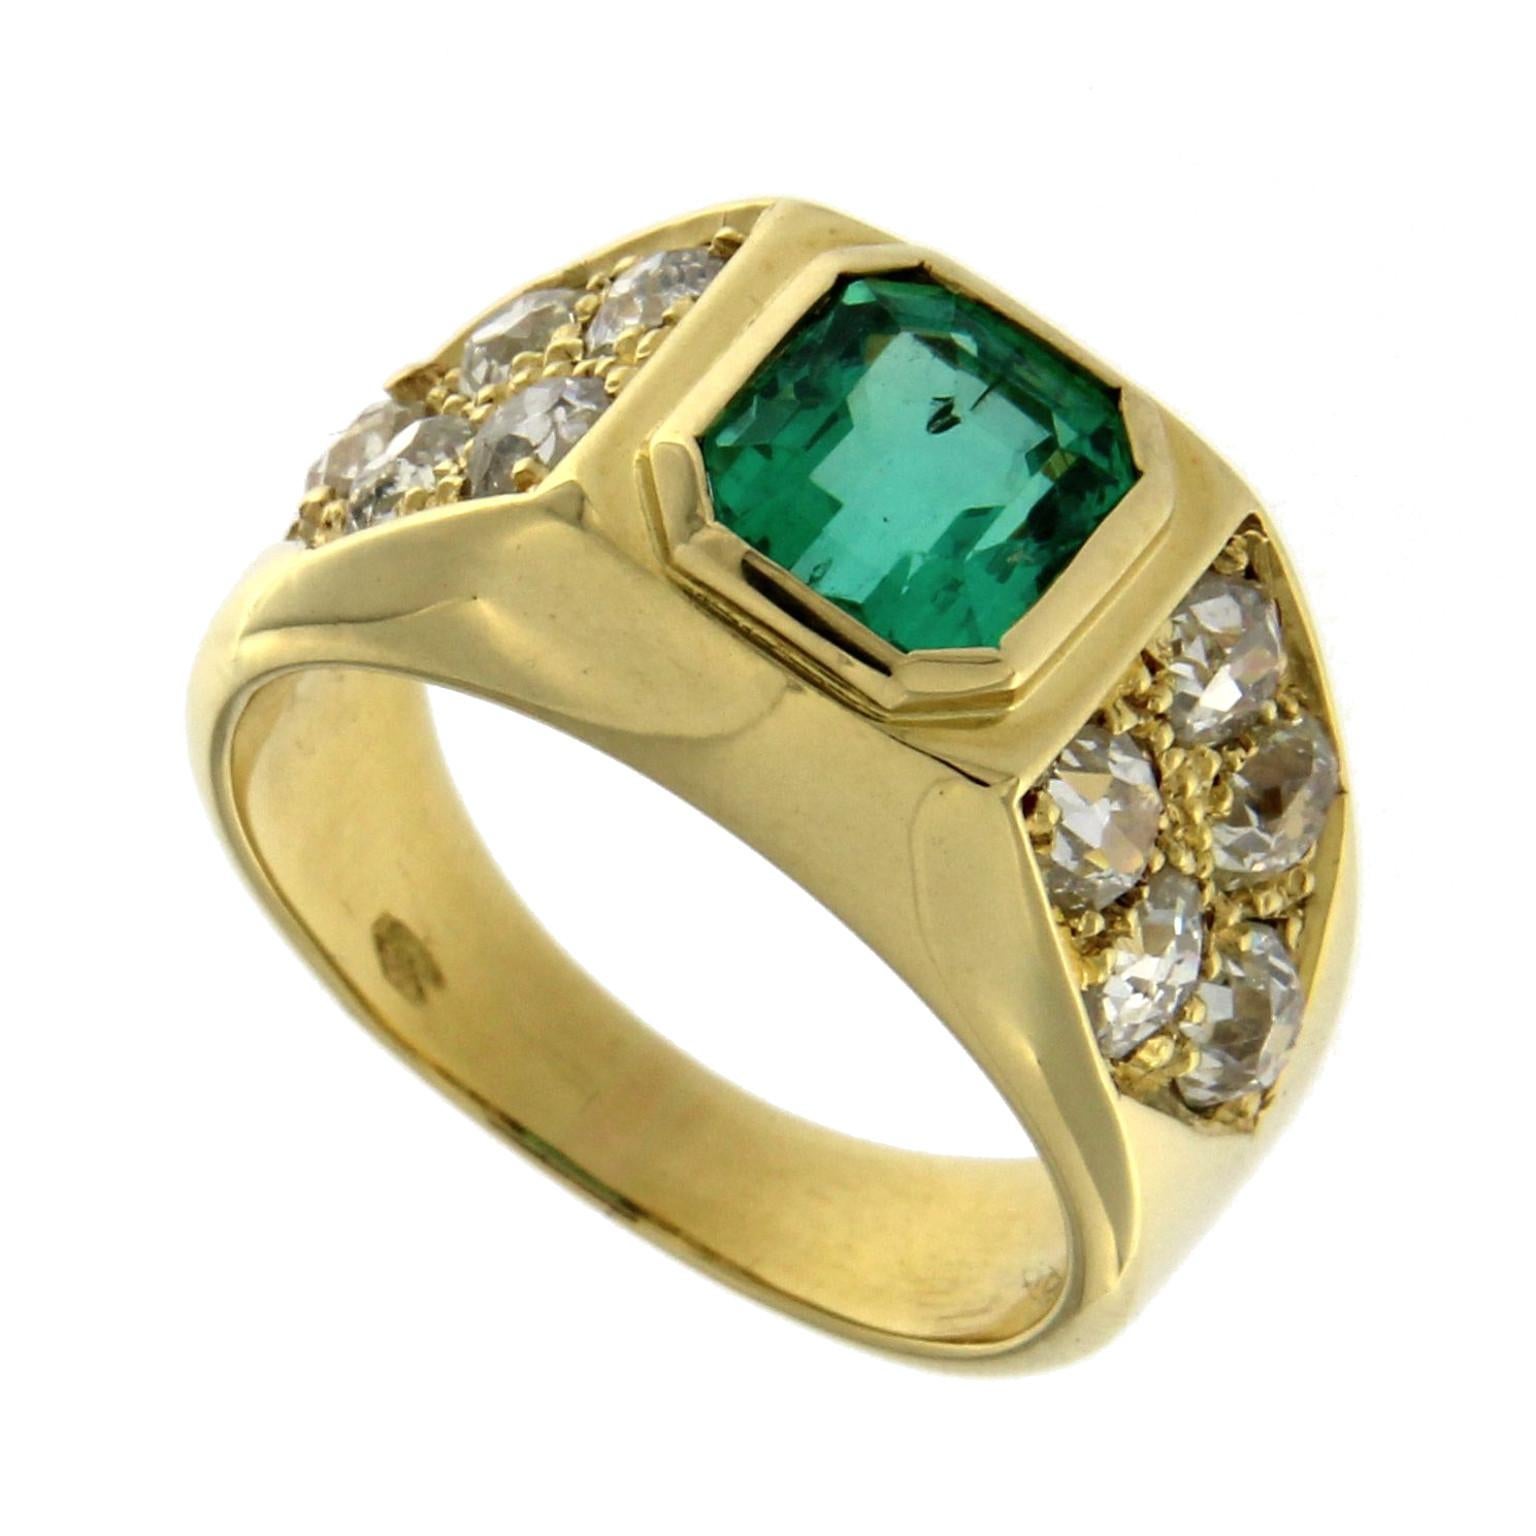 Ring in 18 kt  yellow gold with emerald and white diamonds 

the total weight of the gold is  gr 10,50
the total weight of the white diamonds is ct 1.50
Emerald size is 6x7 mm 

STAMP: 10 MI ITALY 750
US SIZE 6,75
